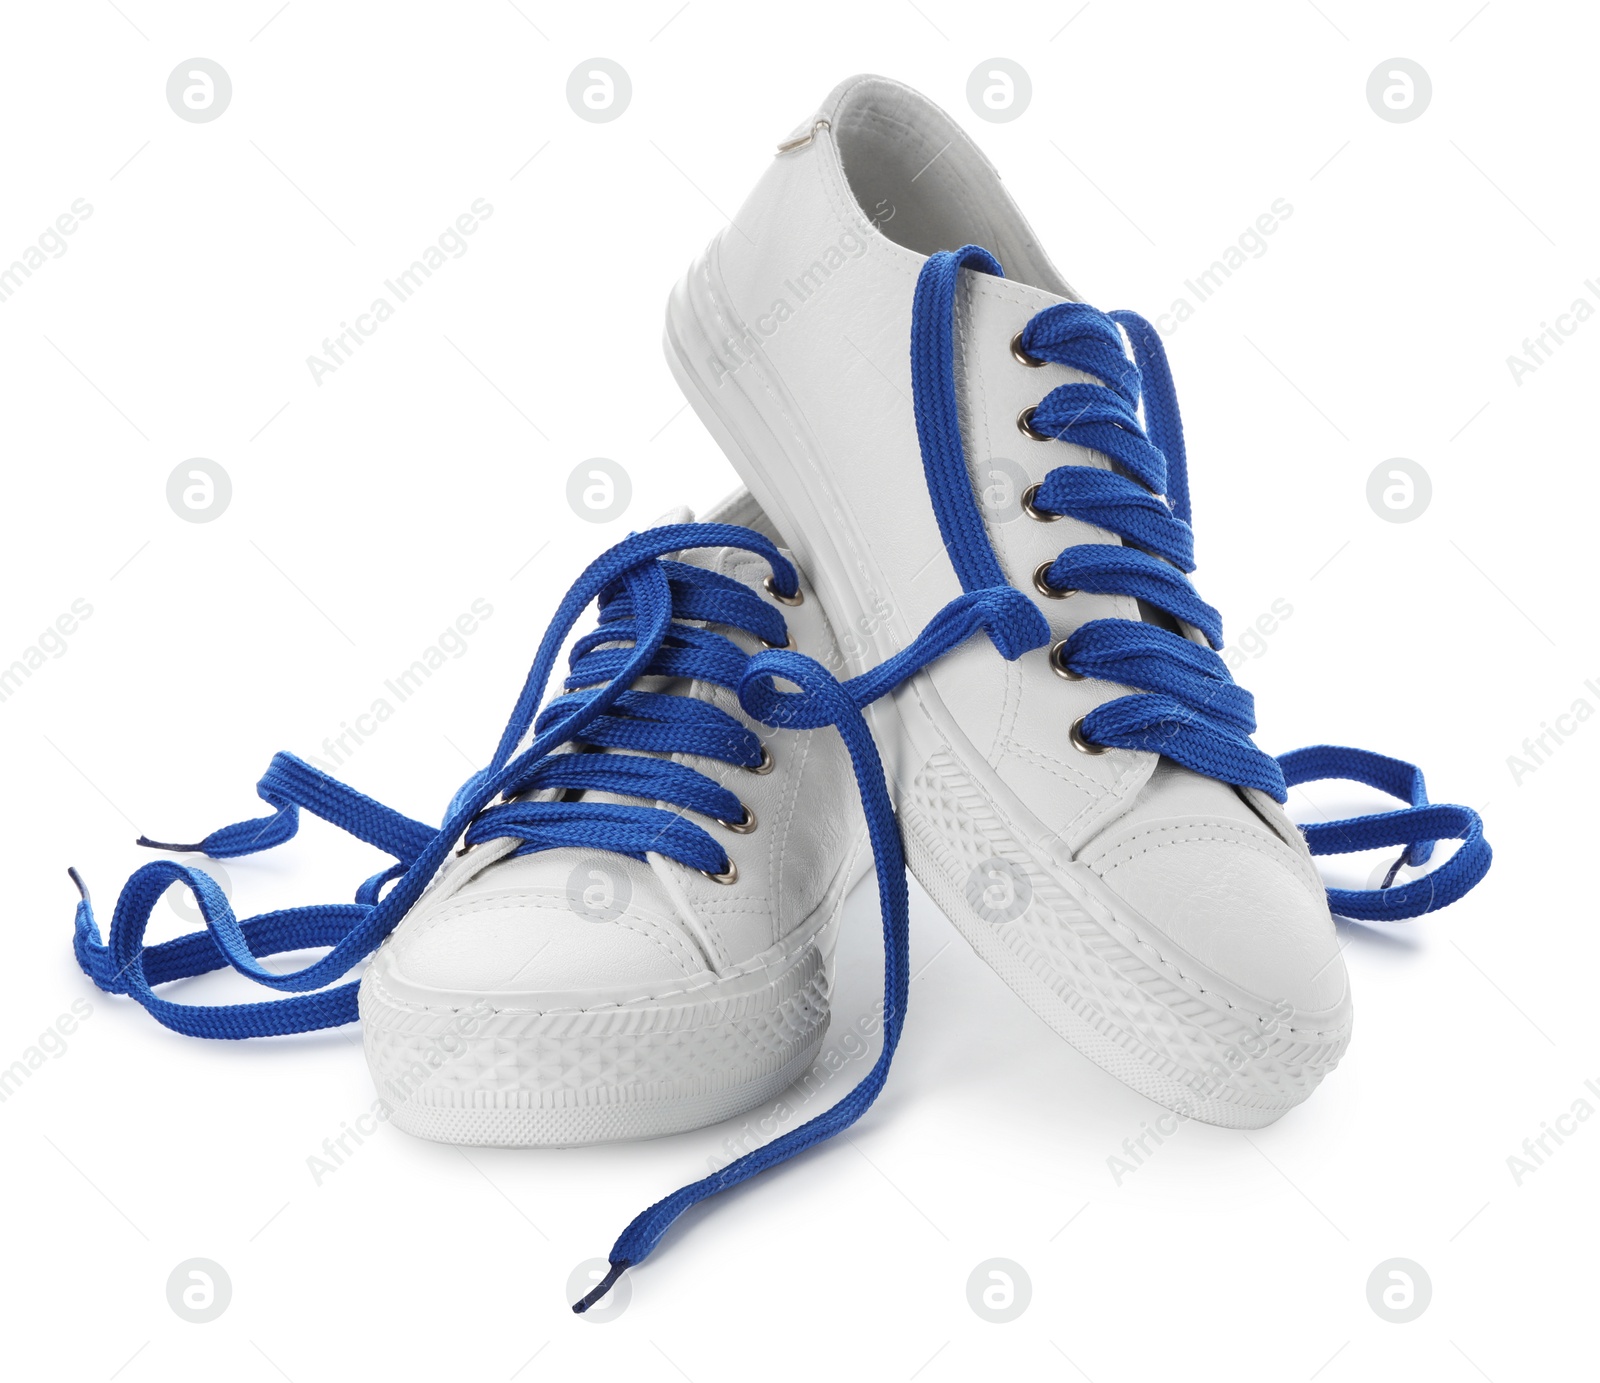 Photo of Stylish sneakers with blue shoelaces on white background